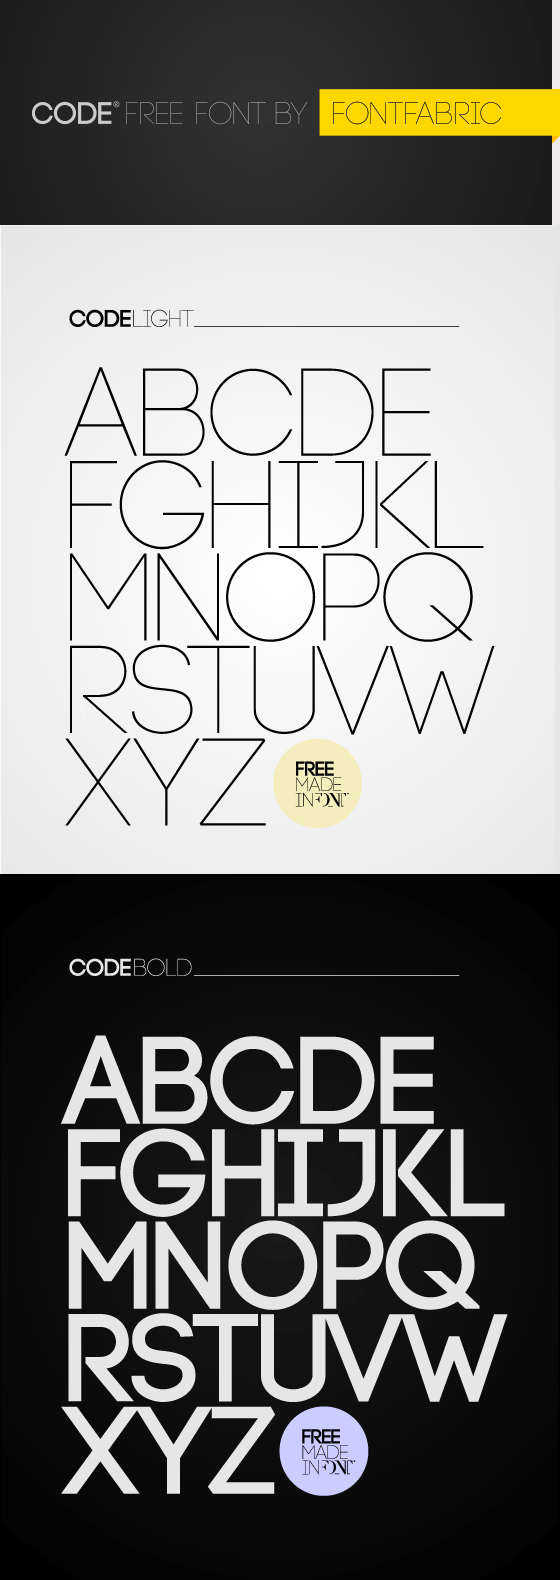 Beautiful, creative free fonts for designers - Code